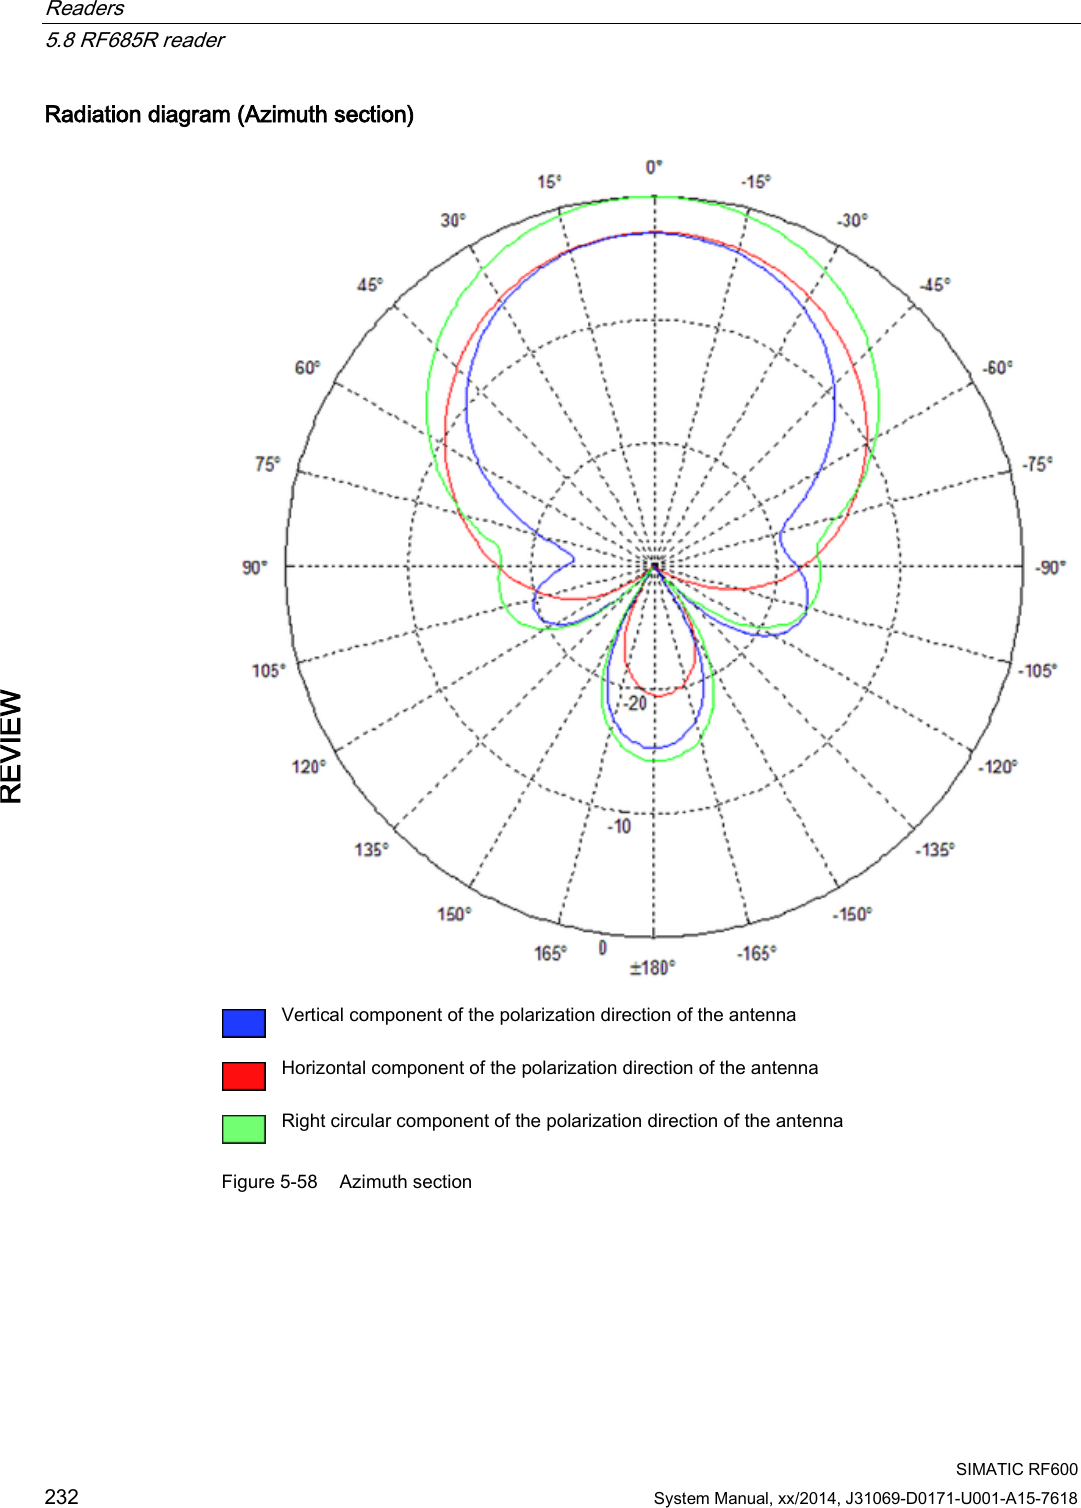 Readers   5.8 RF685R reader  SIMATIC RF600 232 System Manual, xx/2014, J31069-D0171-U001-A15-7618 REVIEW Radiation diagram (Azimuth section)   Vertical component of the polarization direction of the antenna  Horizontal component of the polarization direction of the antenna  Right circular component of the polarization direction of the antenna Figure 5-58 Azimuth section 